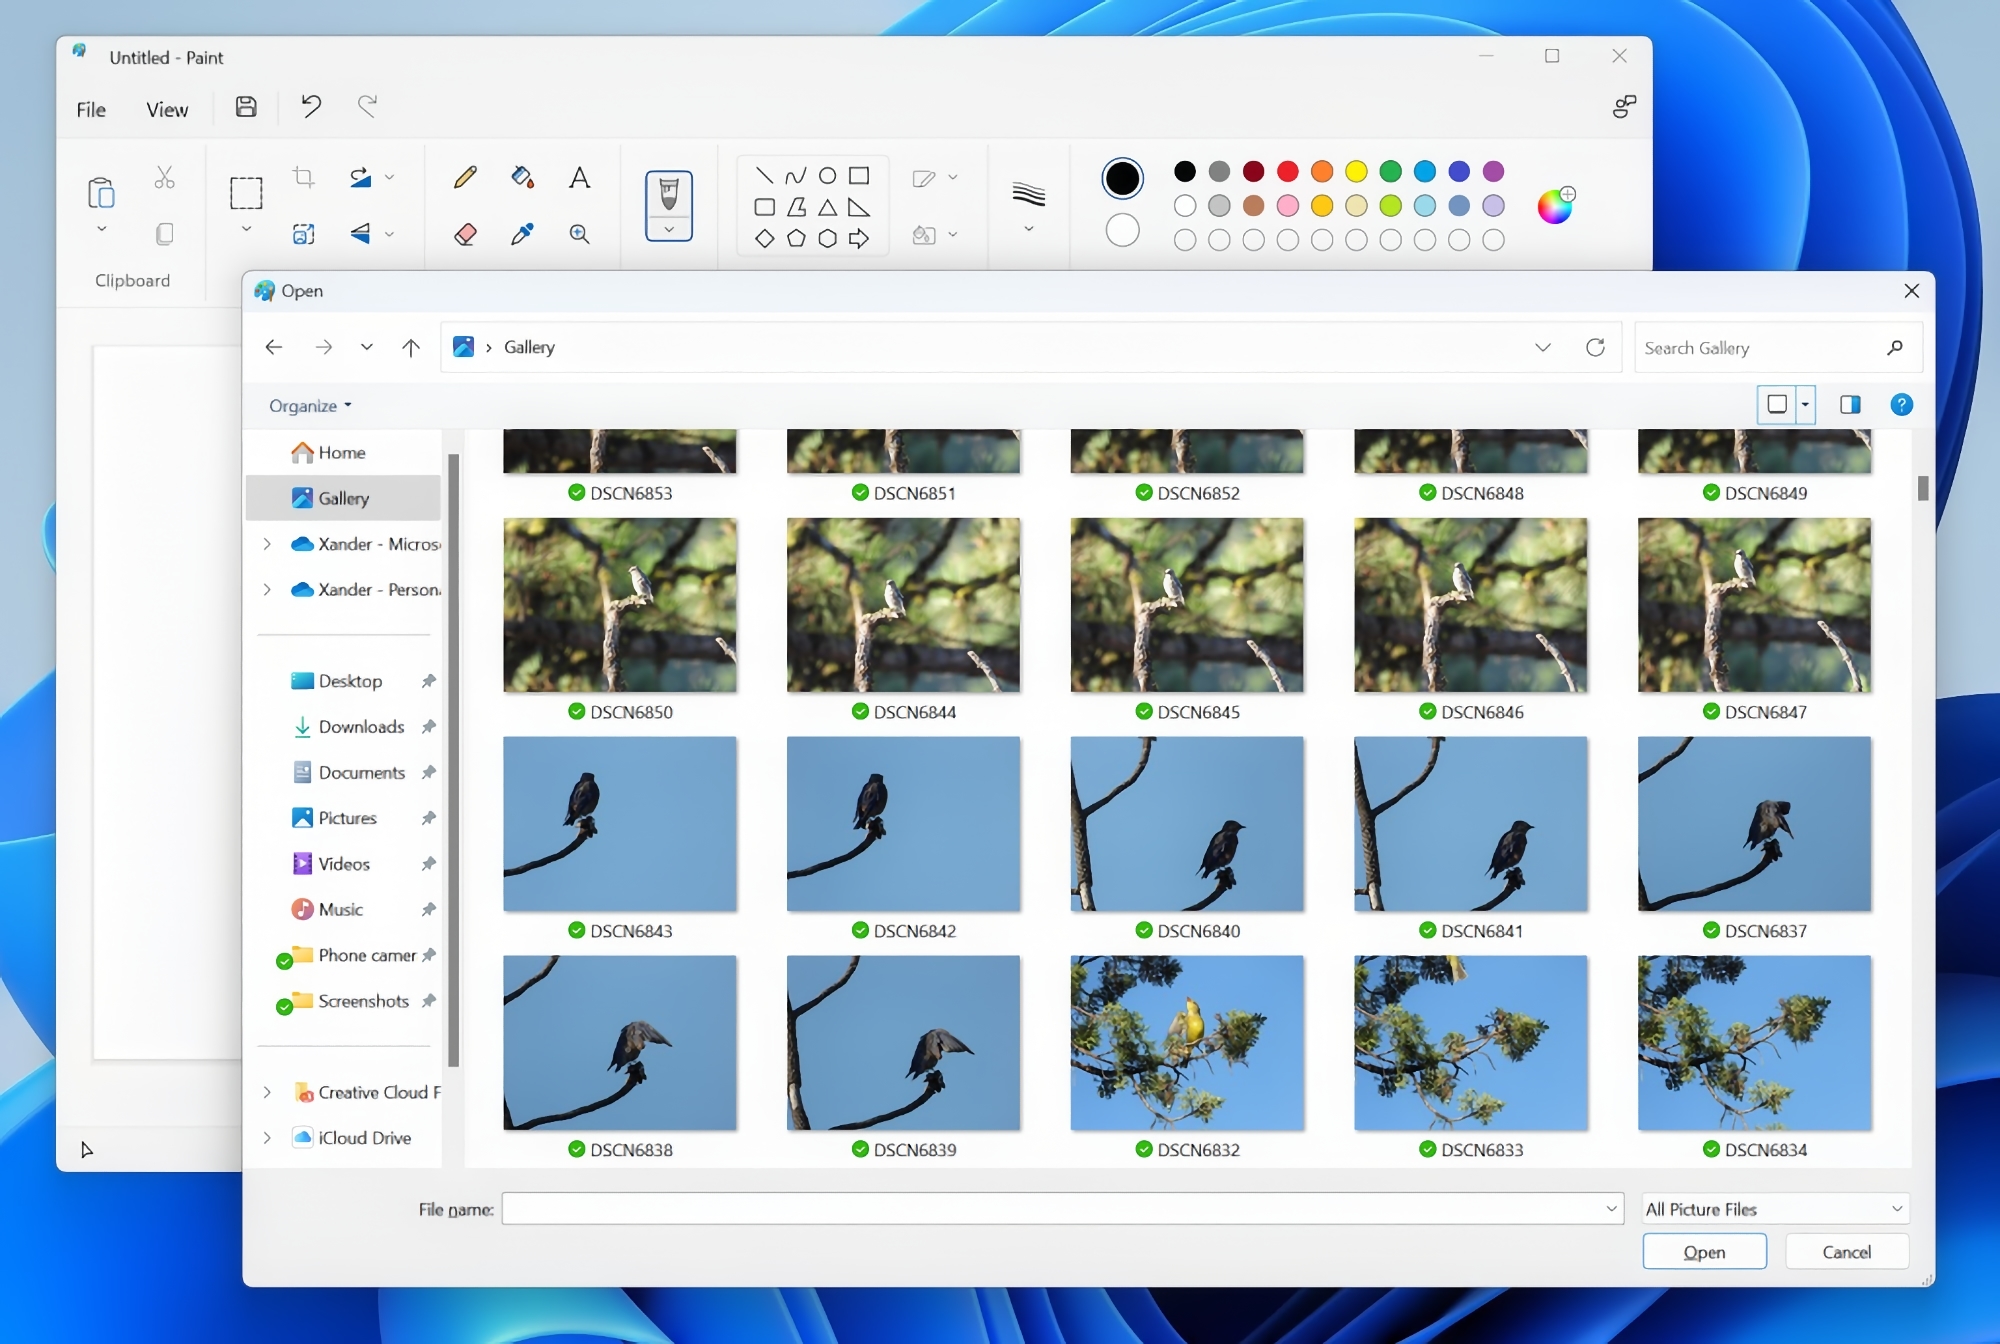 Windows 11 preview brings the Photo app's ‘gallery’ view to File Explorer | DeviceDaily.com